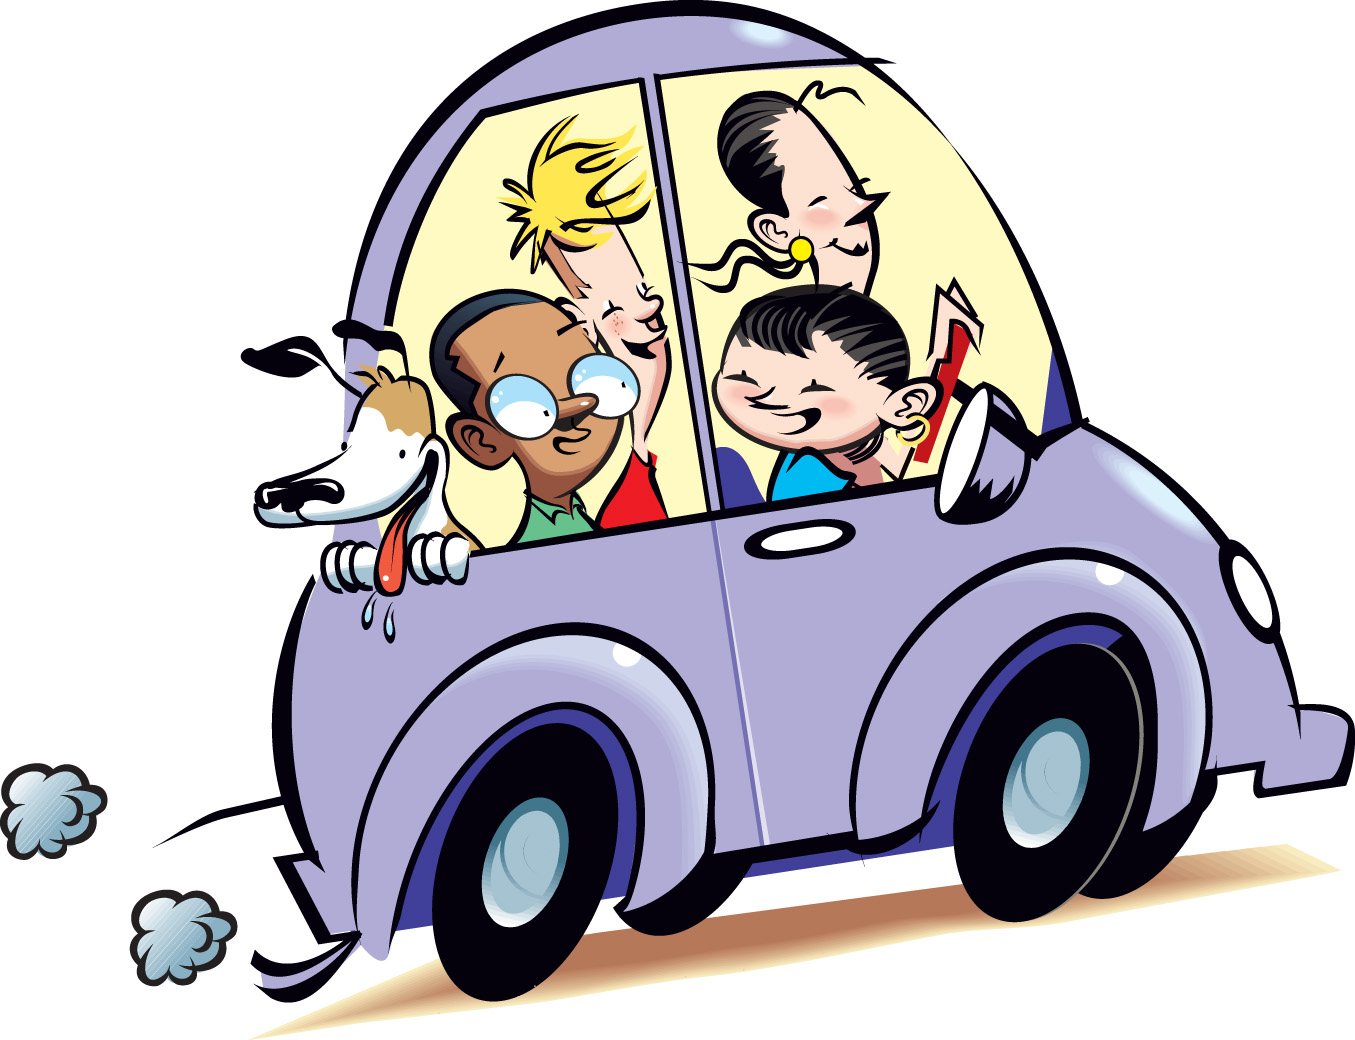 Clip Arts Related To : person in a car clipart. 